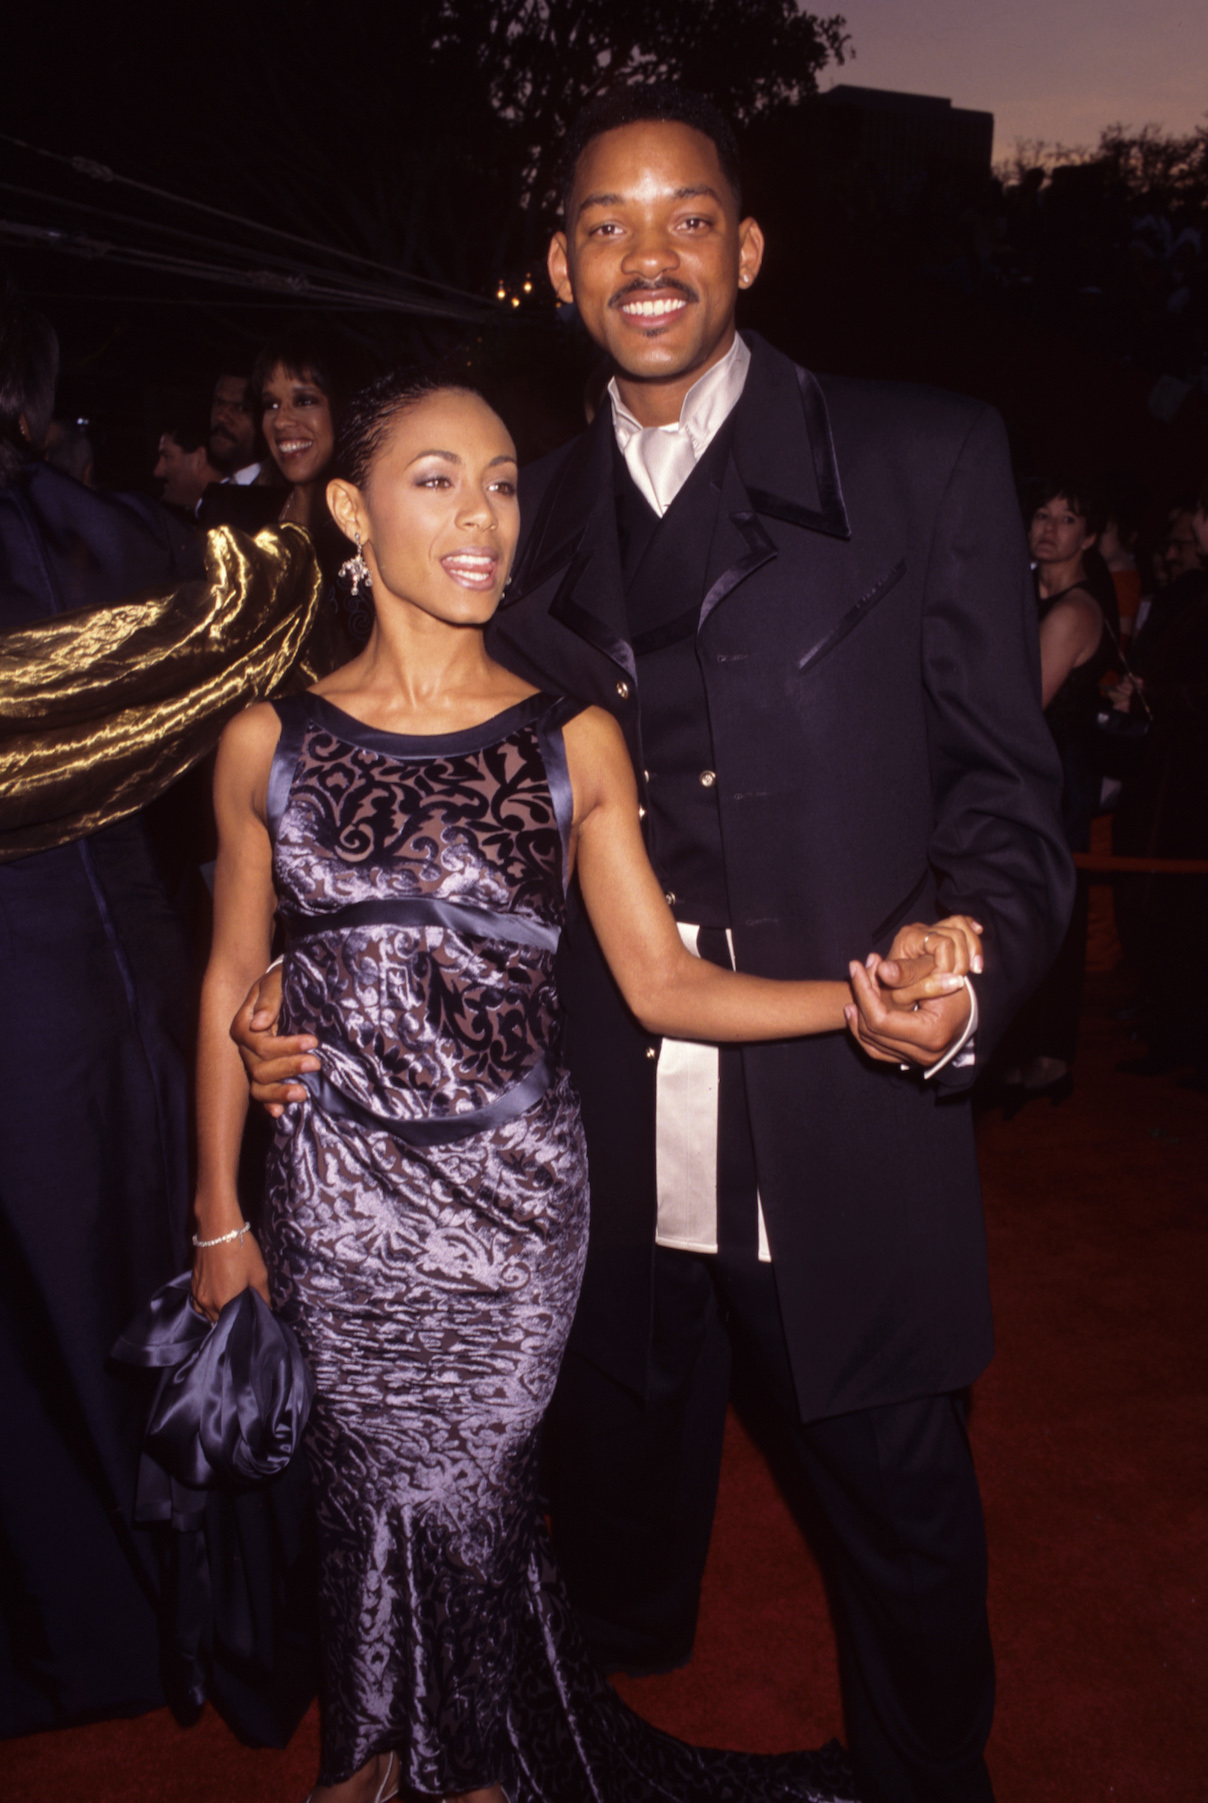 Jada Pinkett Smith and Will Smith attend the 68th annual Academy Awards